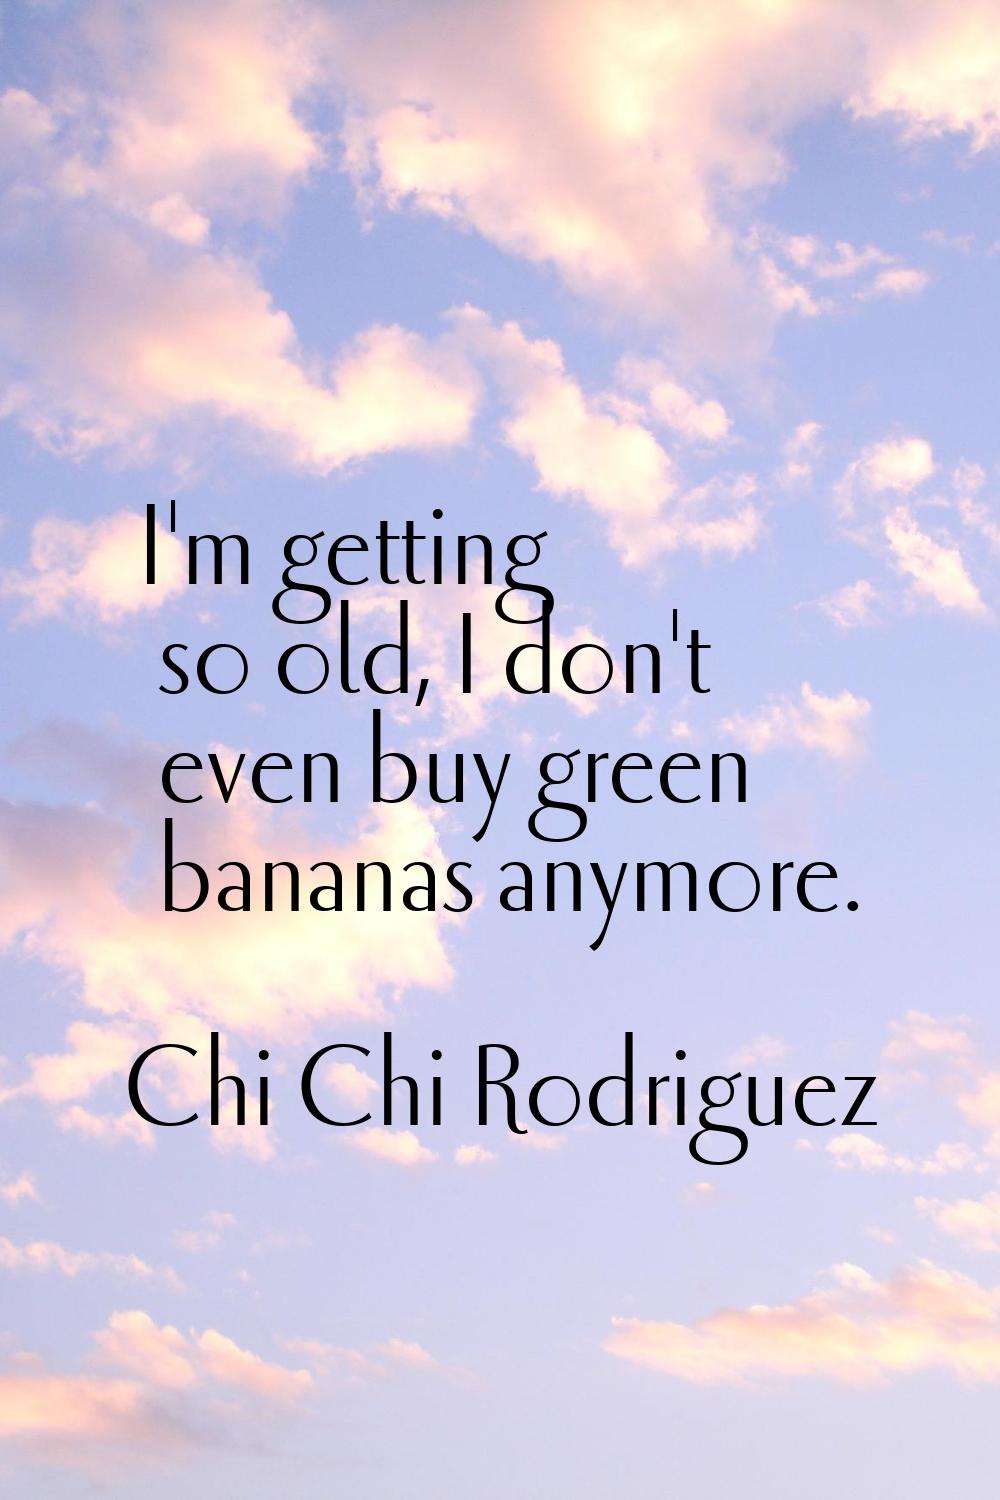 I'm getting so old, I don't even buy green bananas anymore.